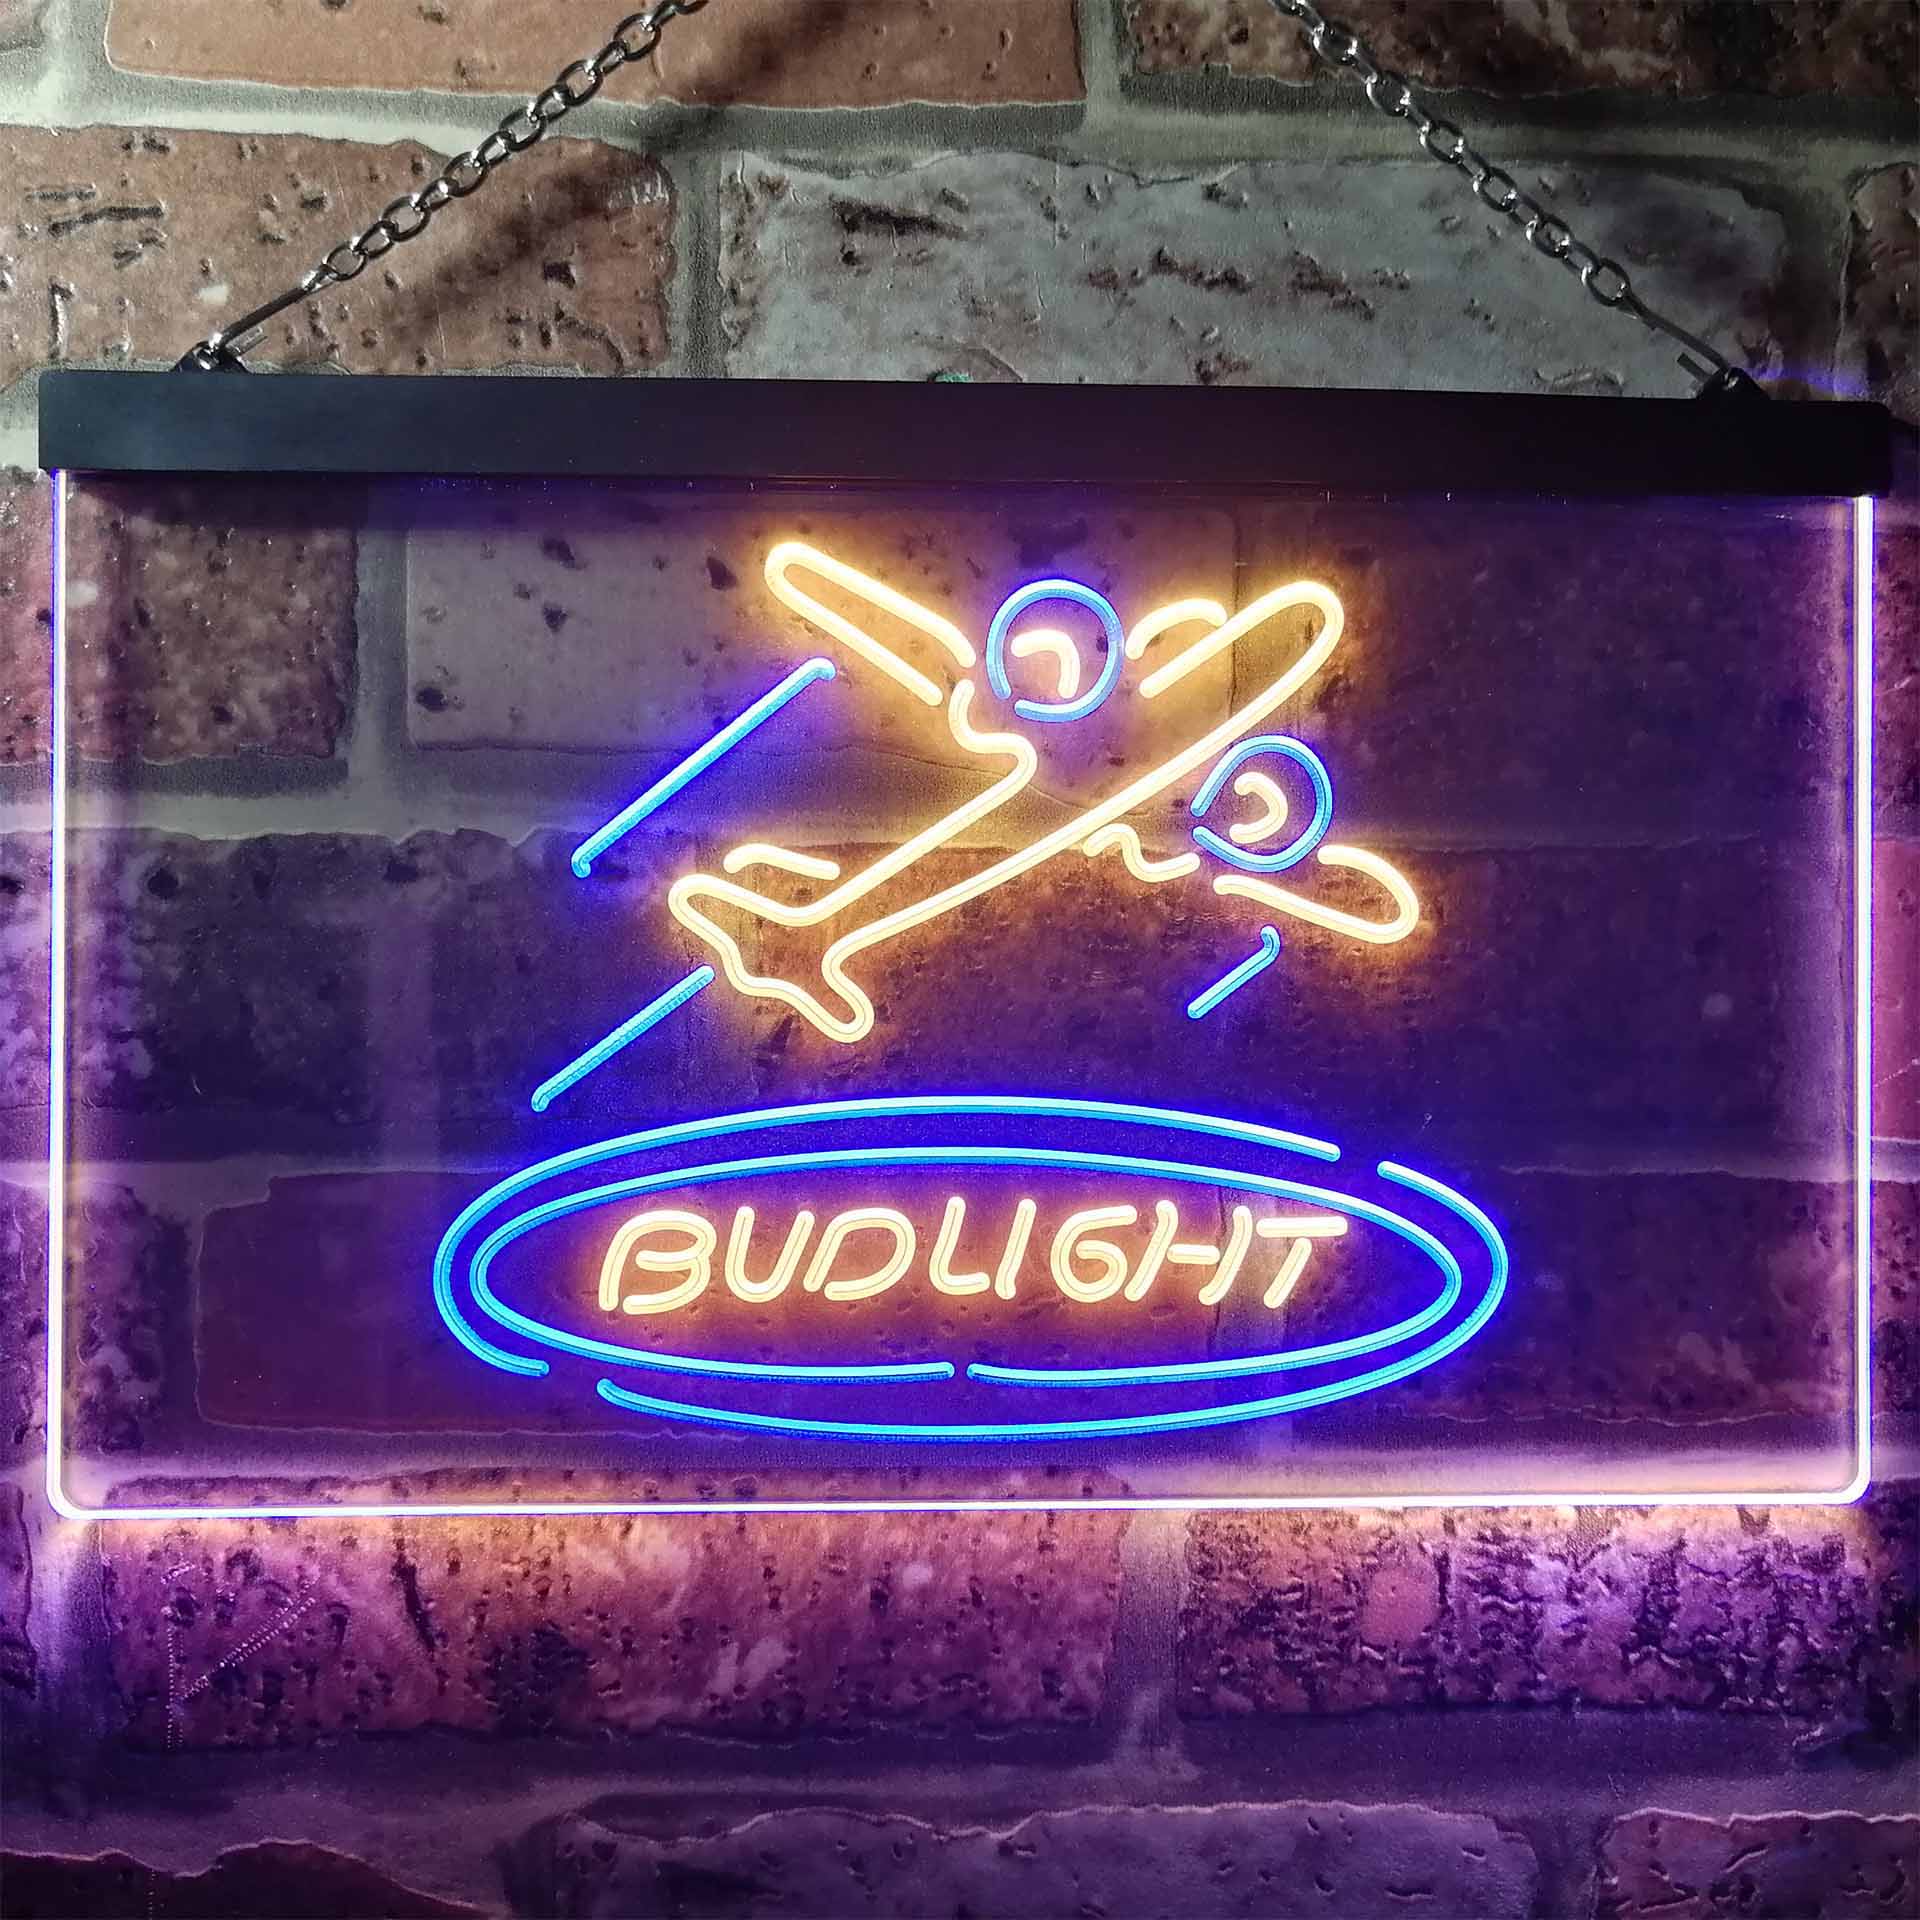 Bud Light airplane Dual Color LED Neon Sign ProLedSign